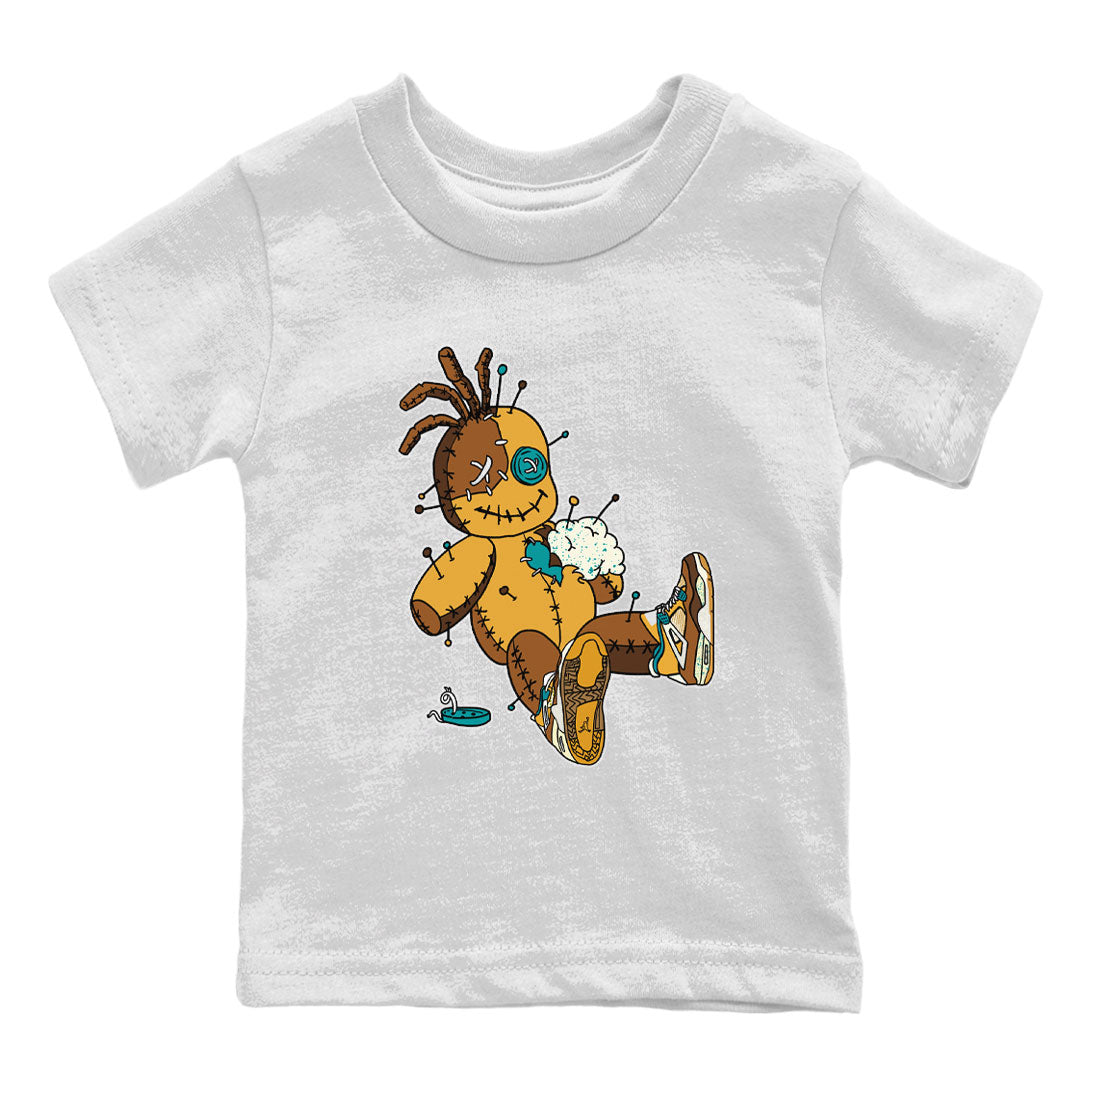 4s Cacao Wow shirt to match jordans Voodoo Doll sneaker tees Air Jordan 4 Cacao Wow SNRT Sneaker Release Tees Baby Toddler White 2 T-Shirt